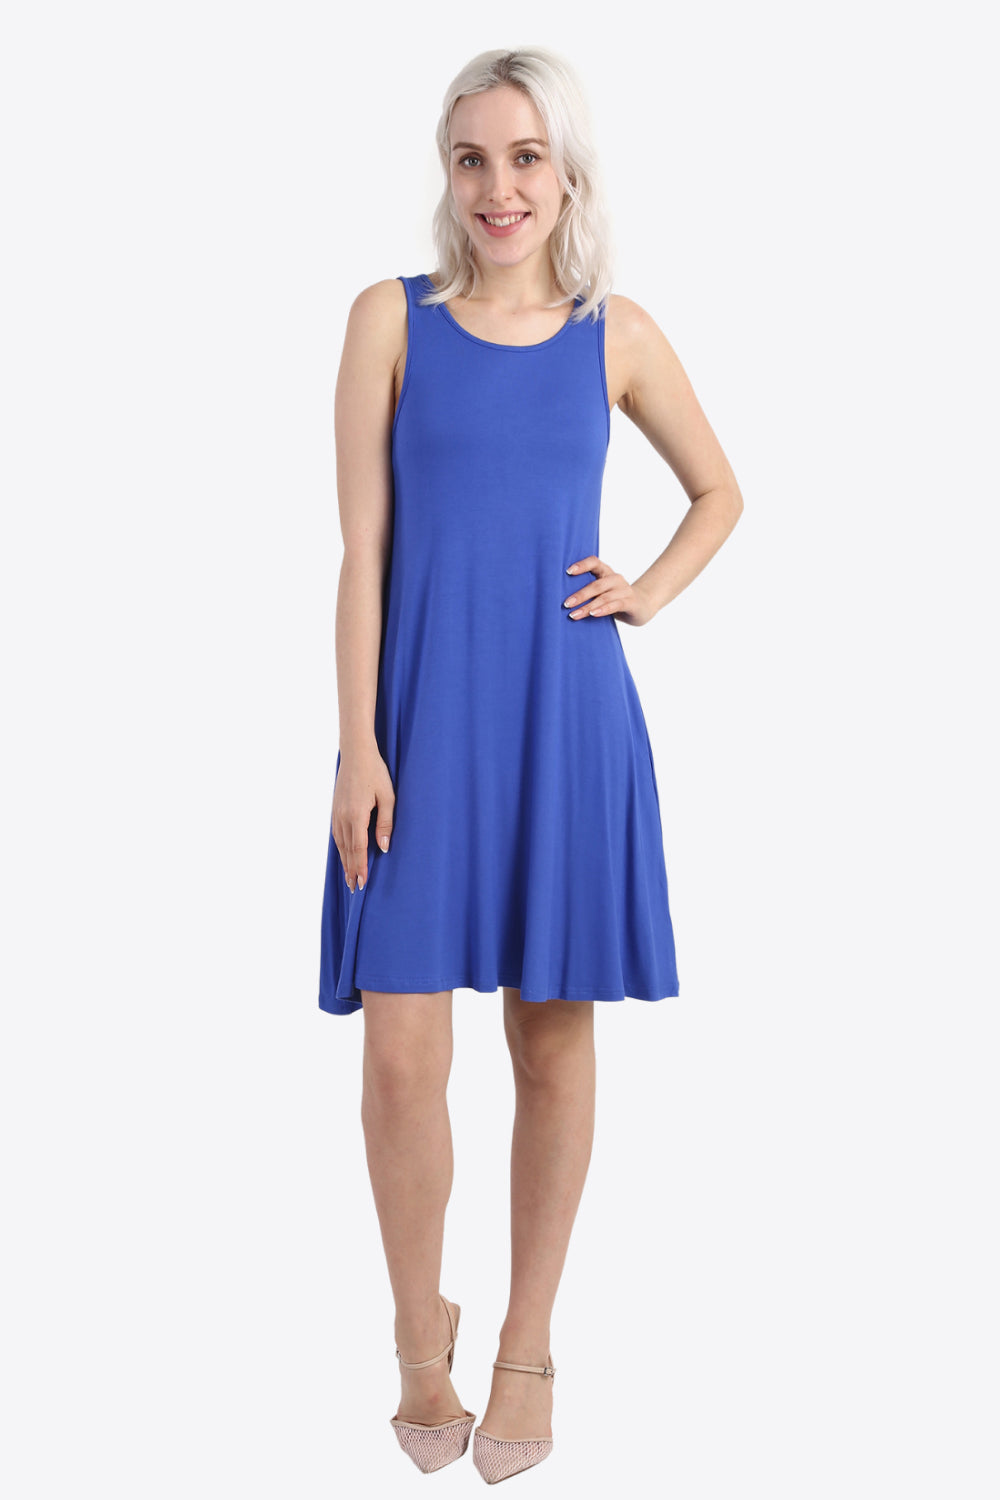 Cutout Scoop Neck Sleeveless Dress with Pockets Print on any thing USA/STOD clothes